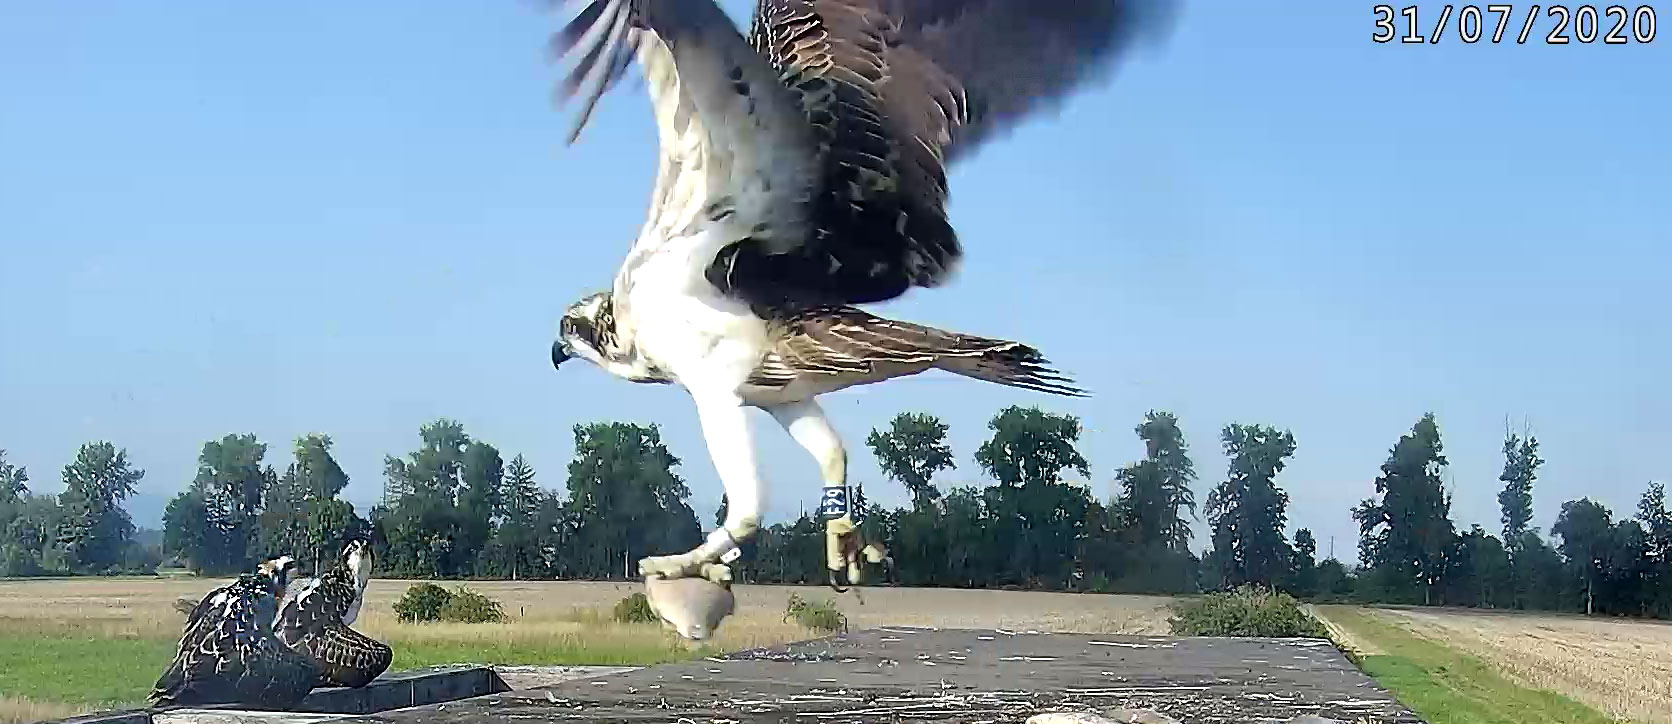 Racine F29 a young Osprey released in Switzerland collecting fish